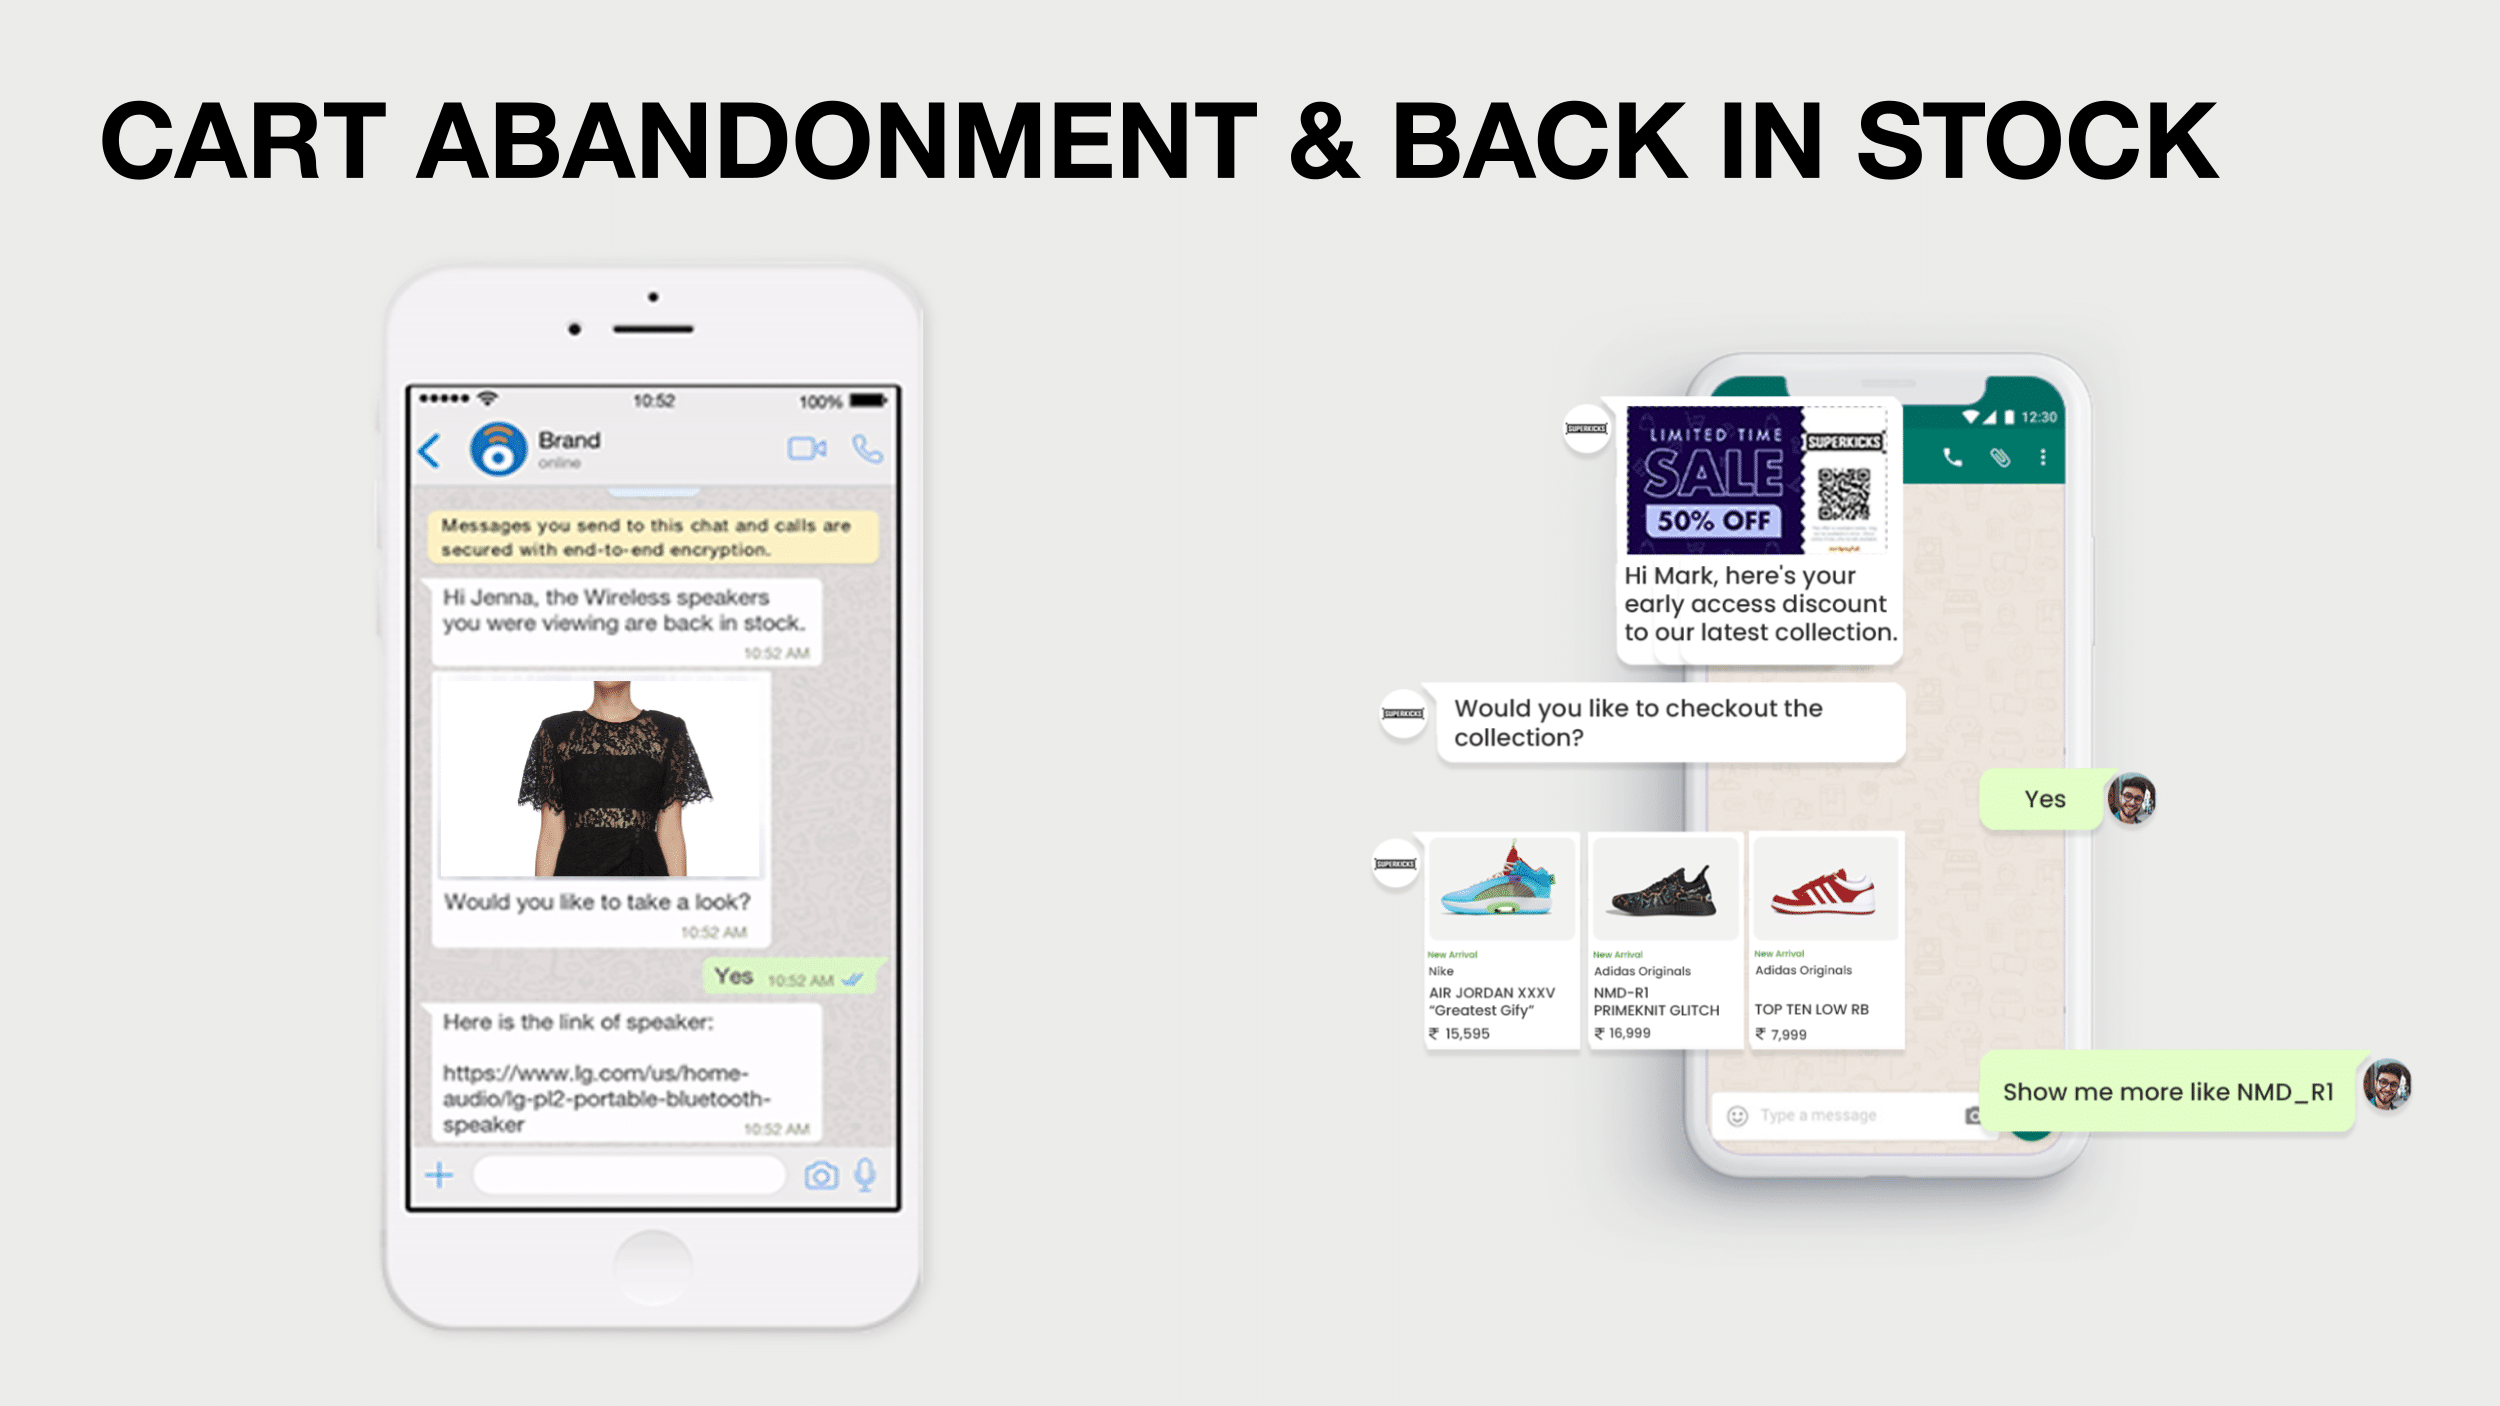 Cart abandonment and back in stock WhatsApp campaigns